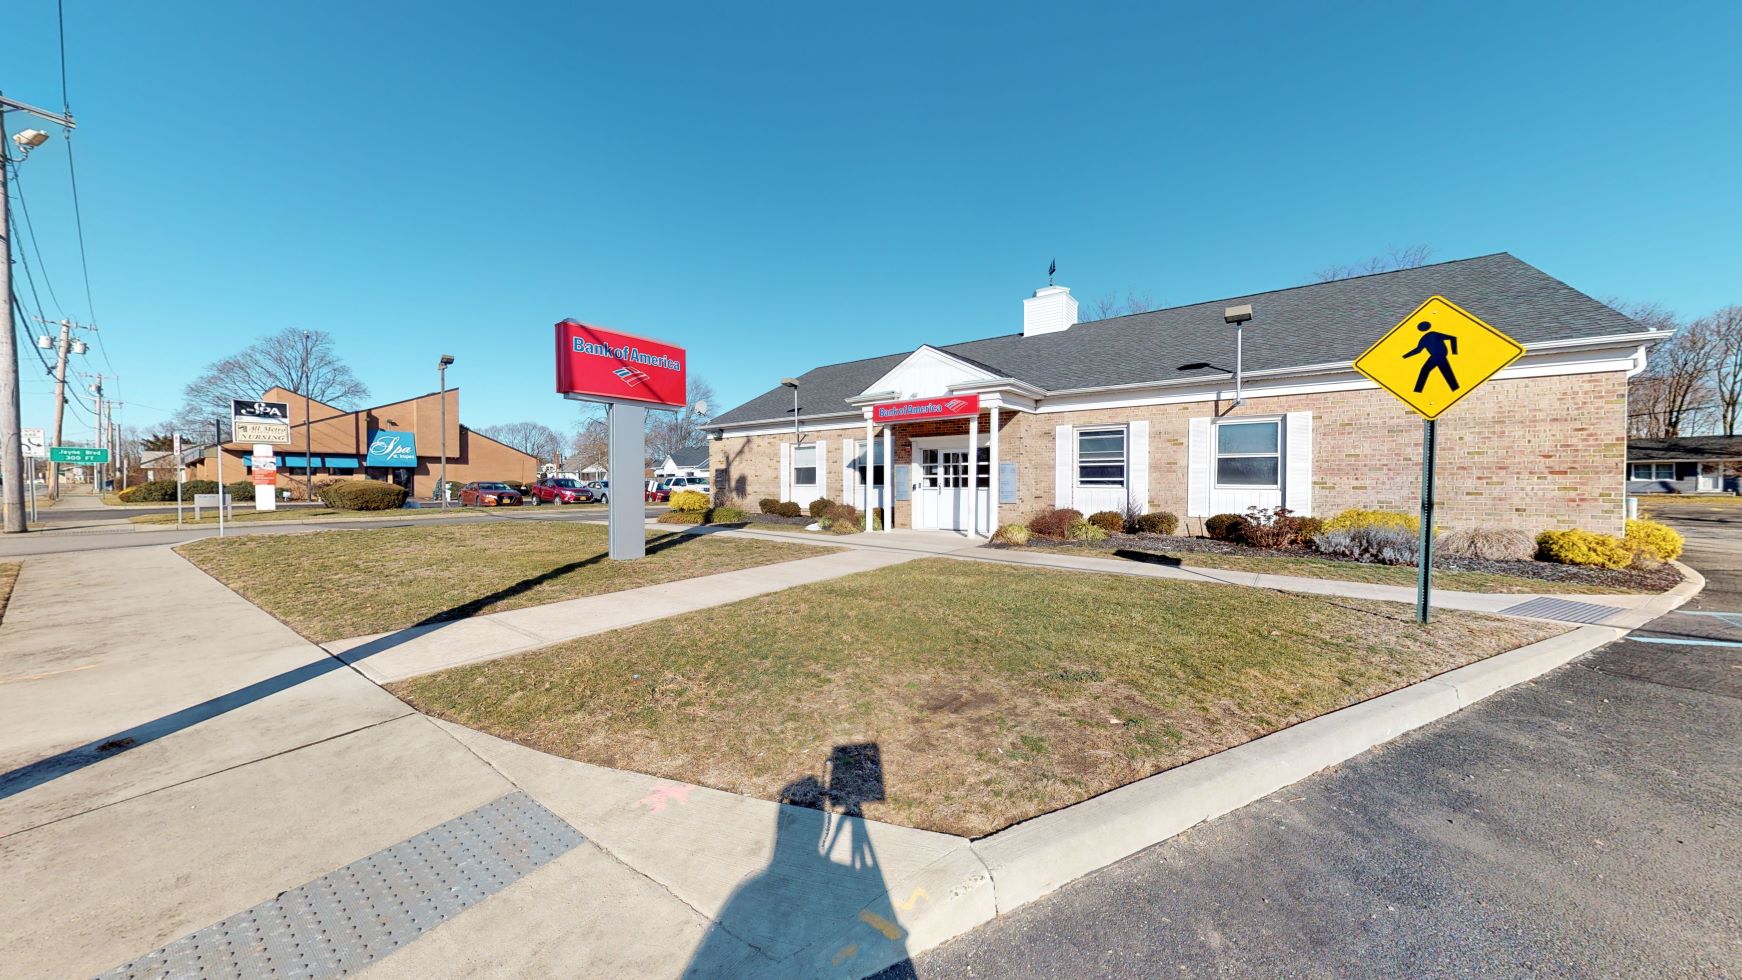 Bank of America financial center with drive-thru ATM | 911 Route 112, Port Jefferson Station, NY 11776